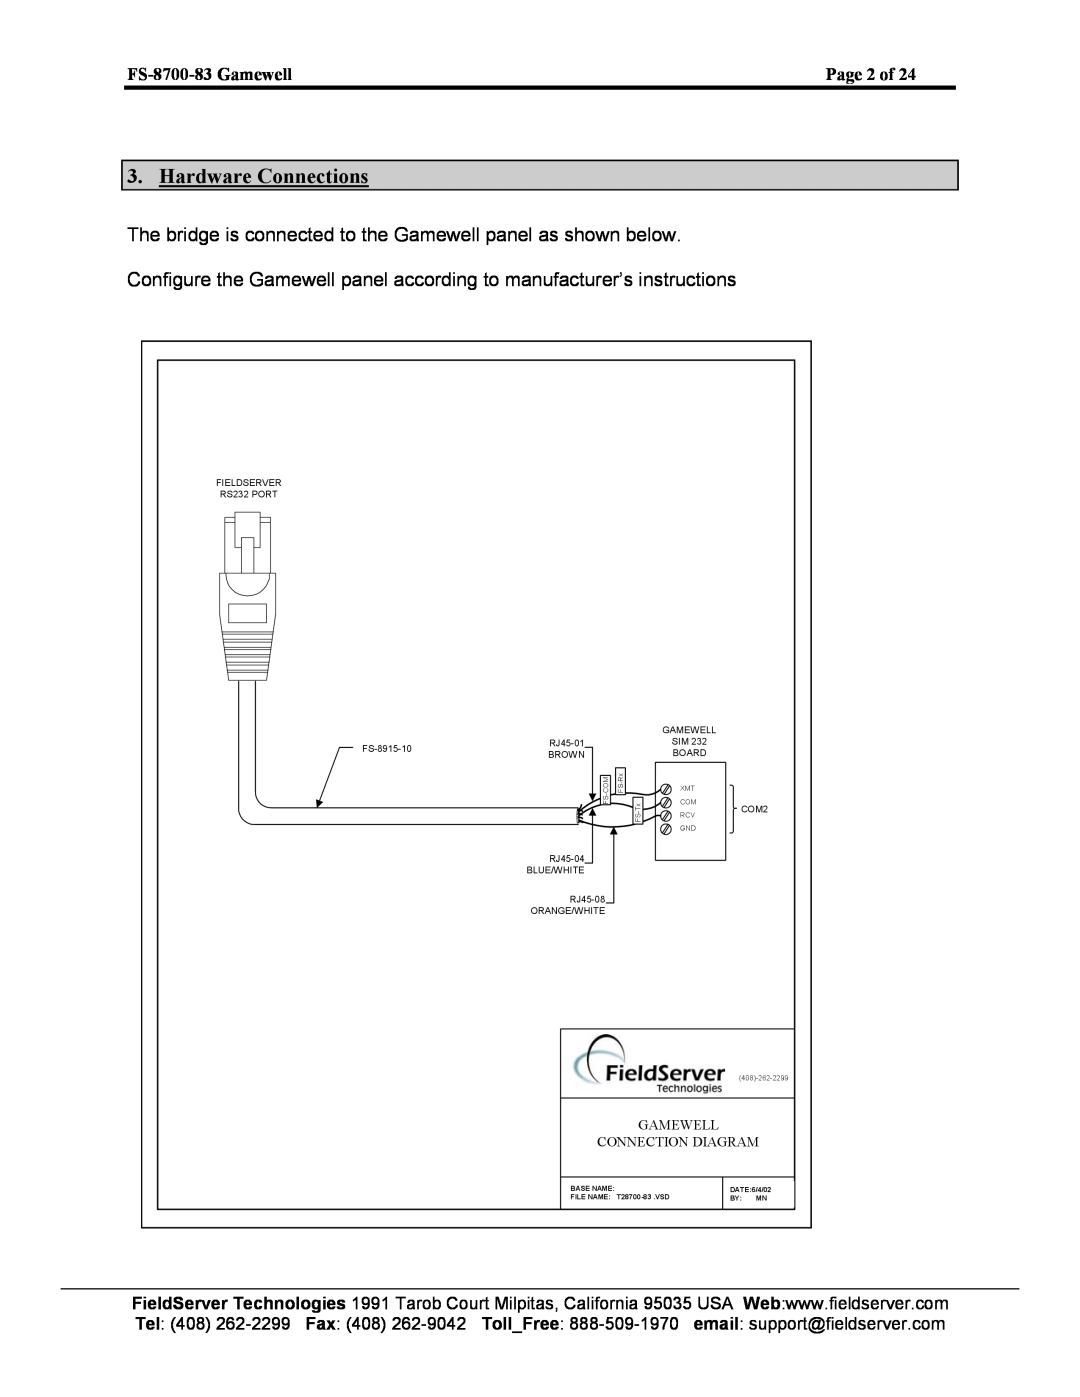 FieldServer instruction manual Hardware Connections, FS-8700-83 Gamewell, Page 2 of, Connection Diagram 